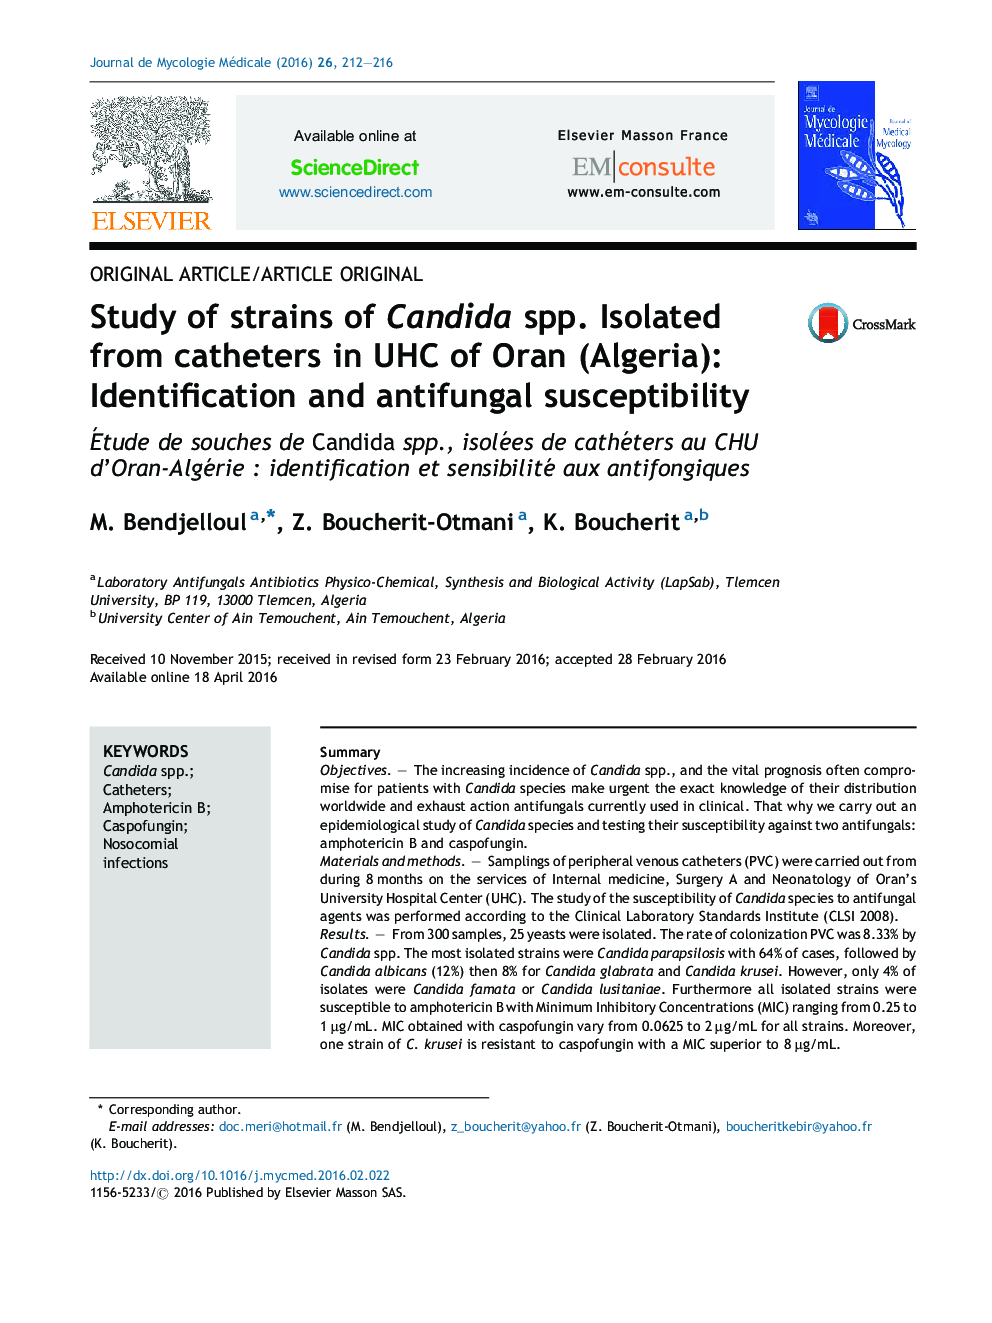 Study of strains of Candida spp. Isolated from catheters in UHC of Oran (Algeria): Identification and antifungal susceptibility